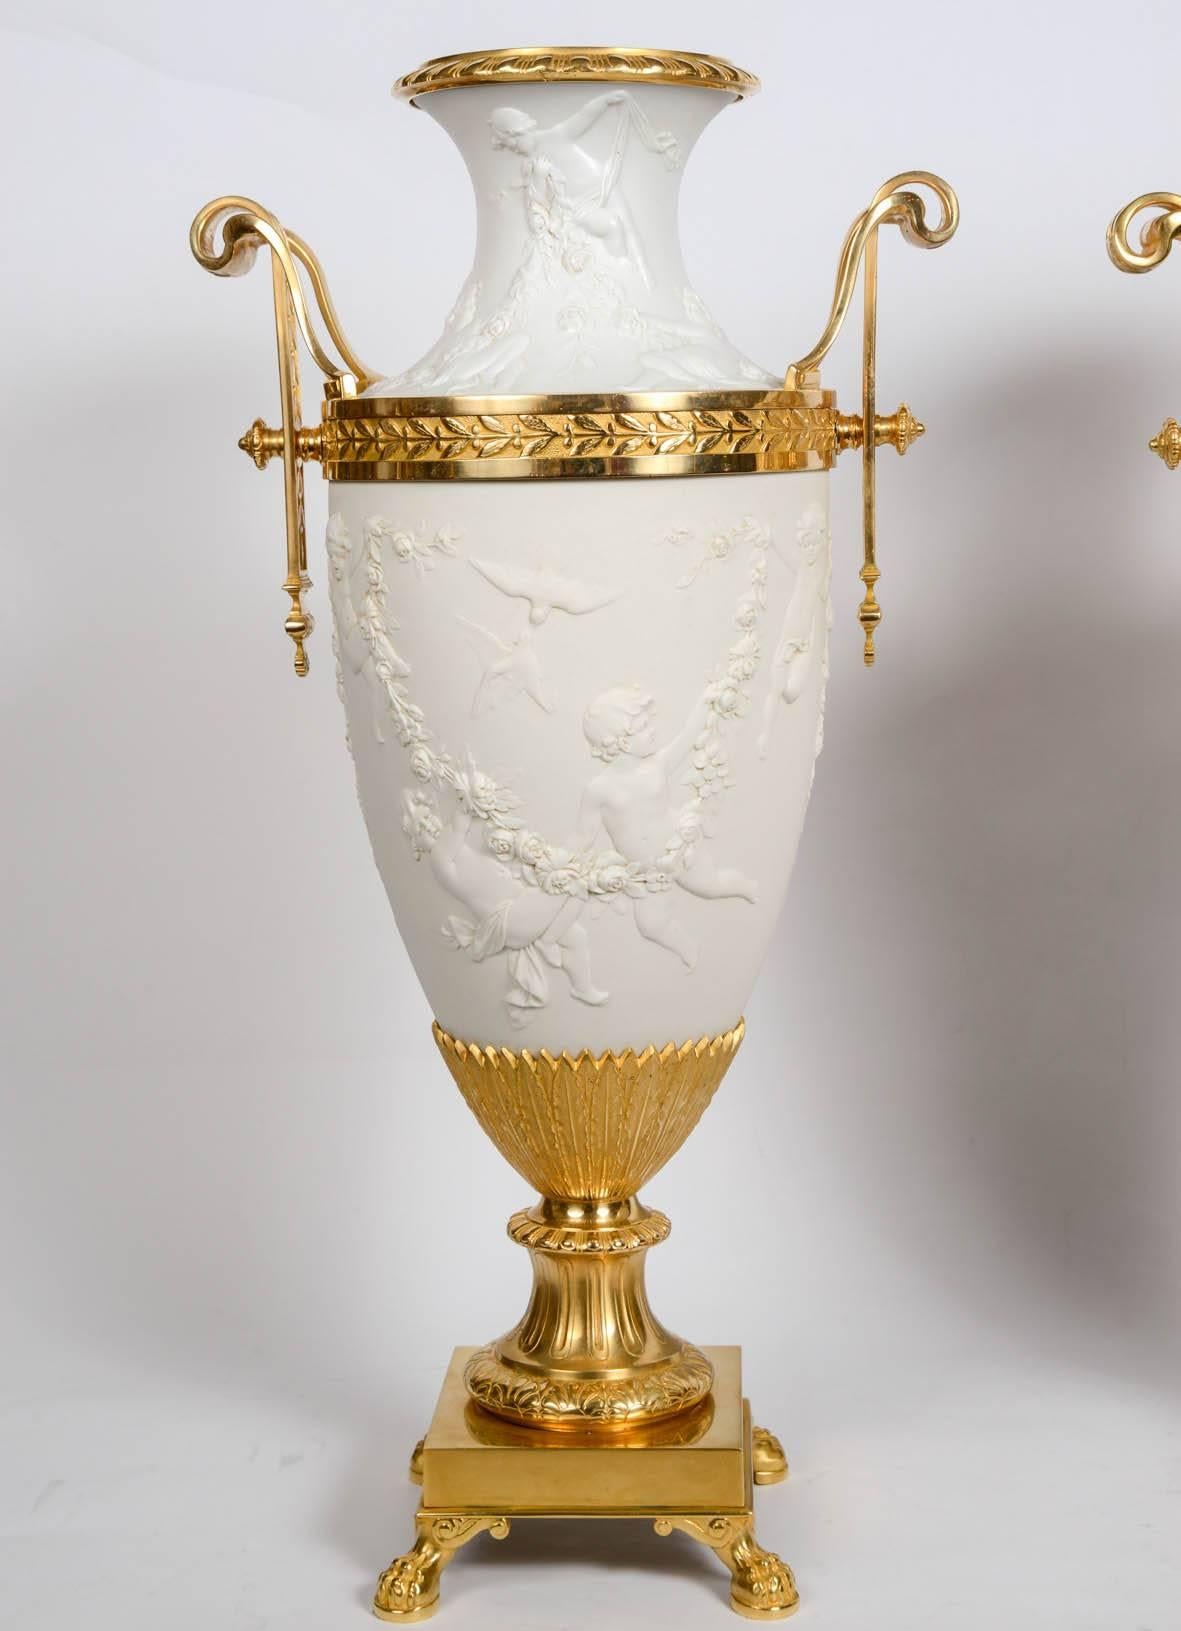 Gorgeous vases white bisquit standing on a gilded bronze base, with two gilded bronze handles.